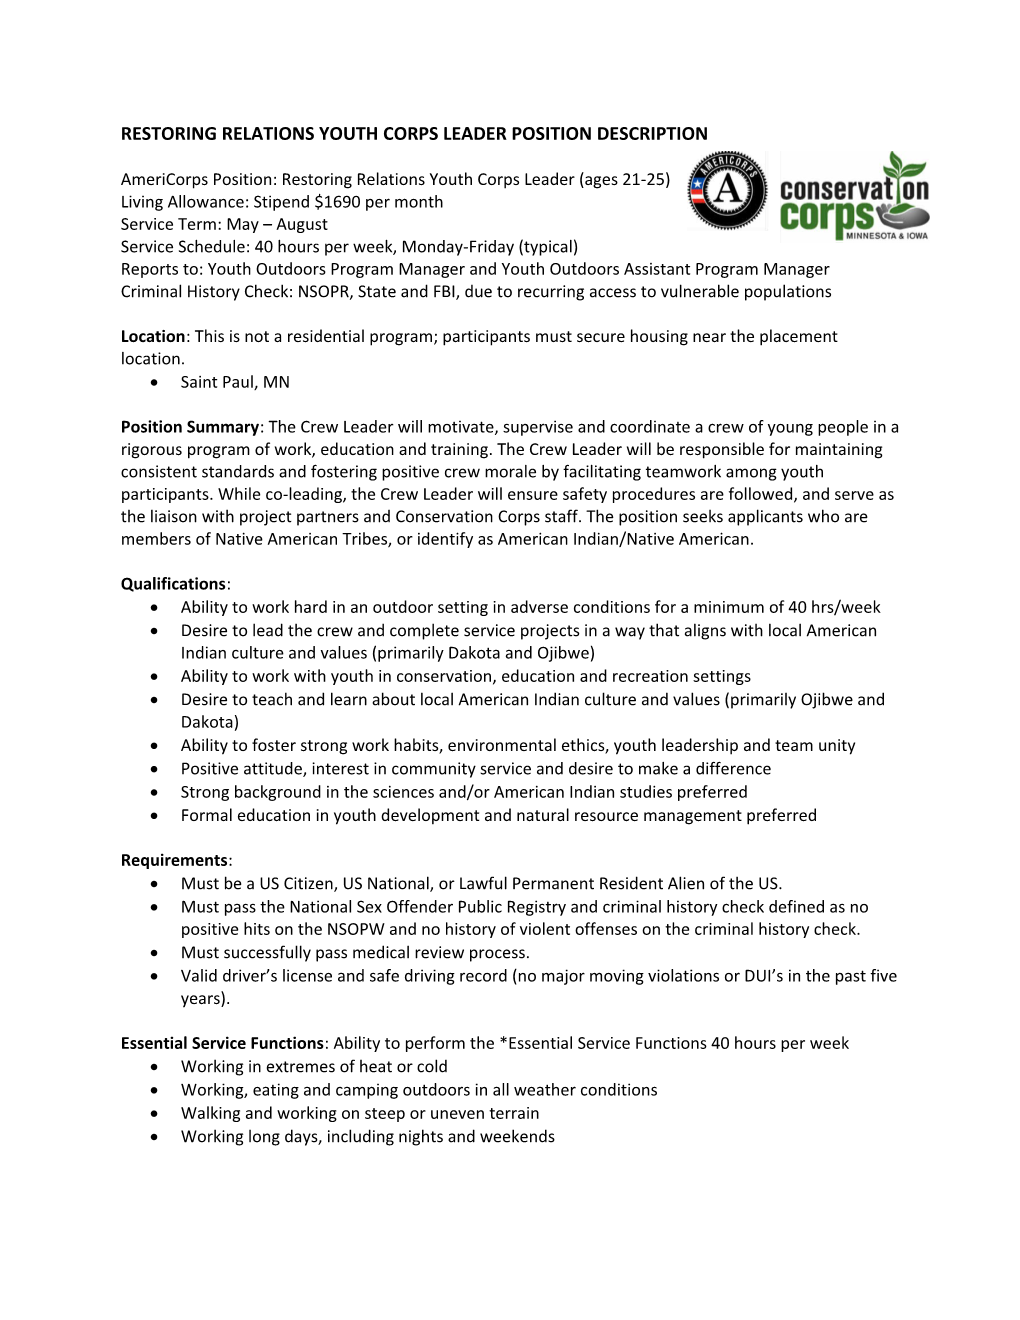 Restoring Relations Youth Corps Leader Position Description